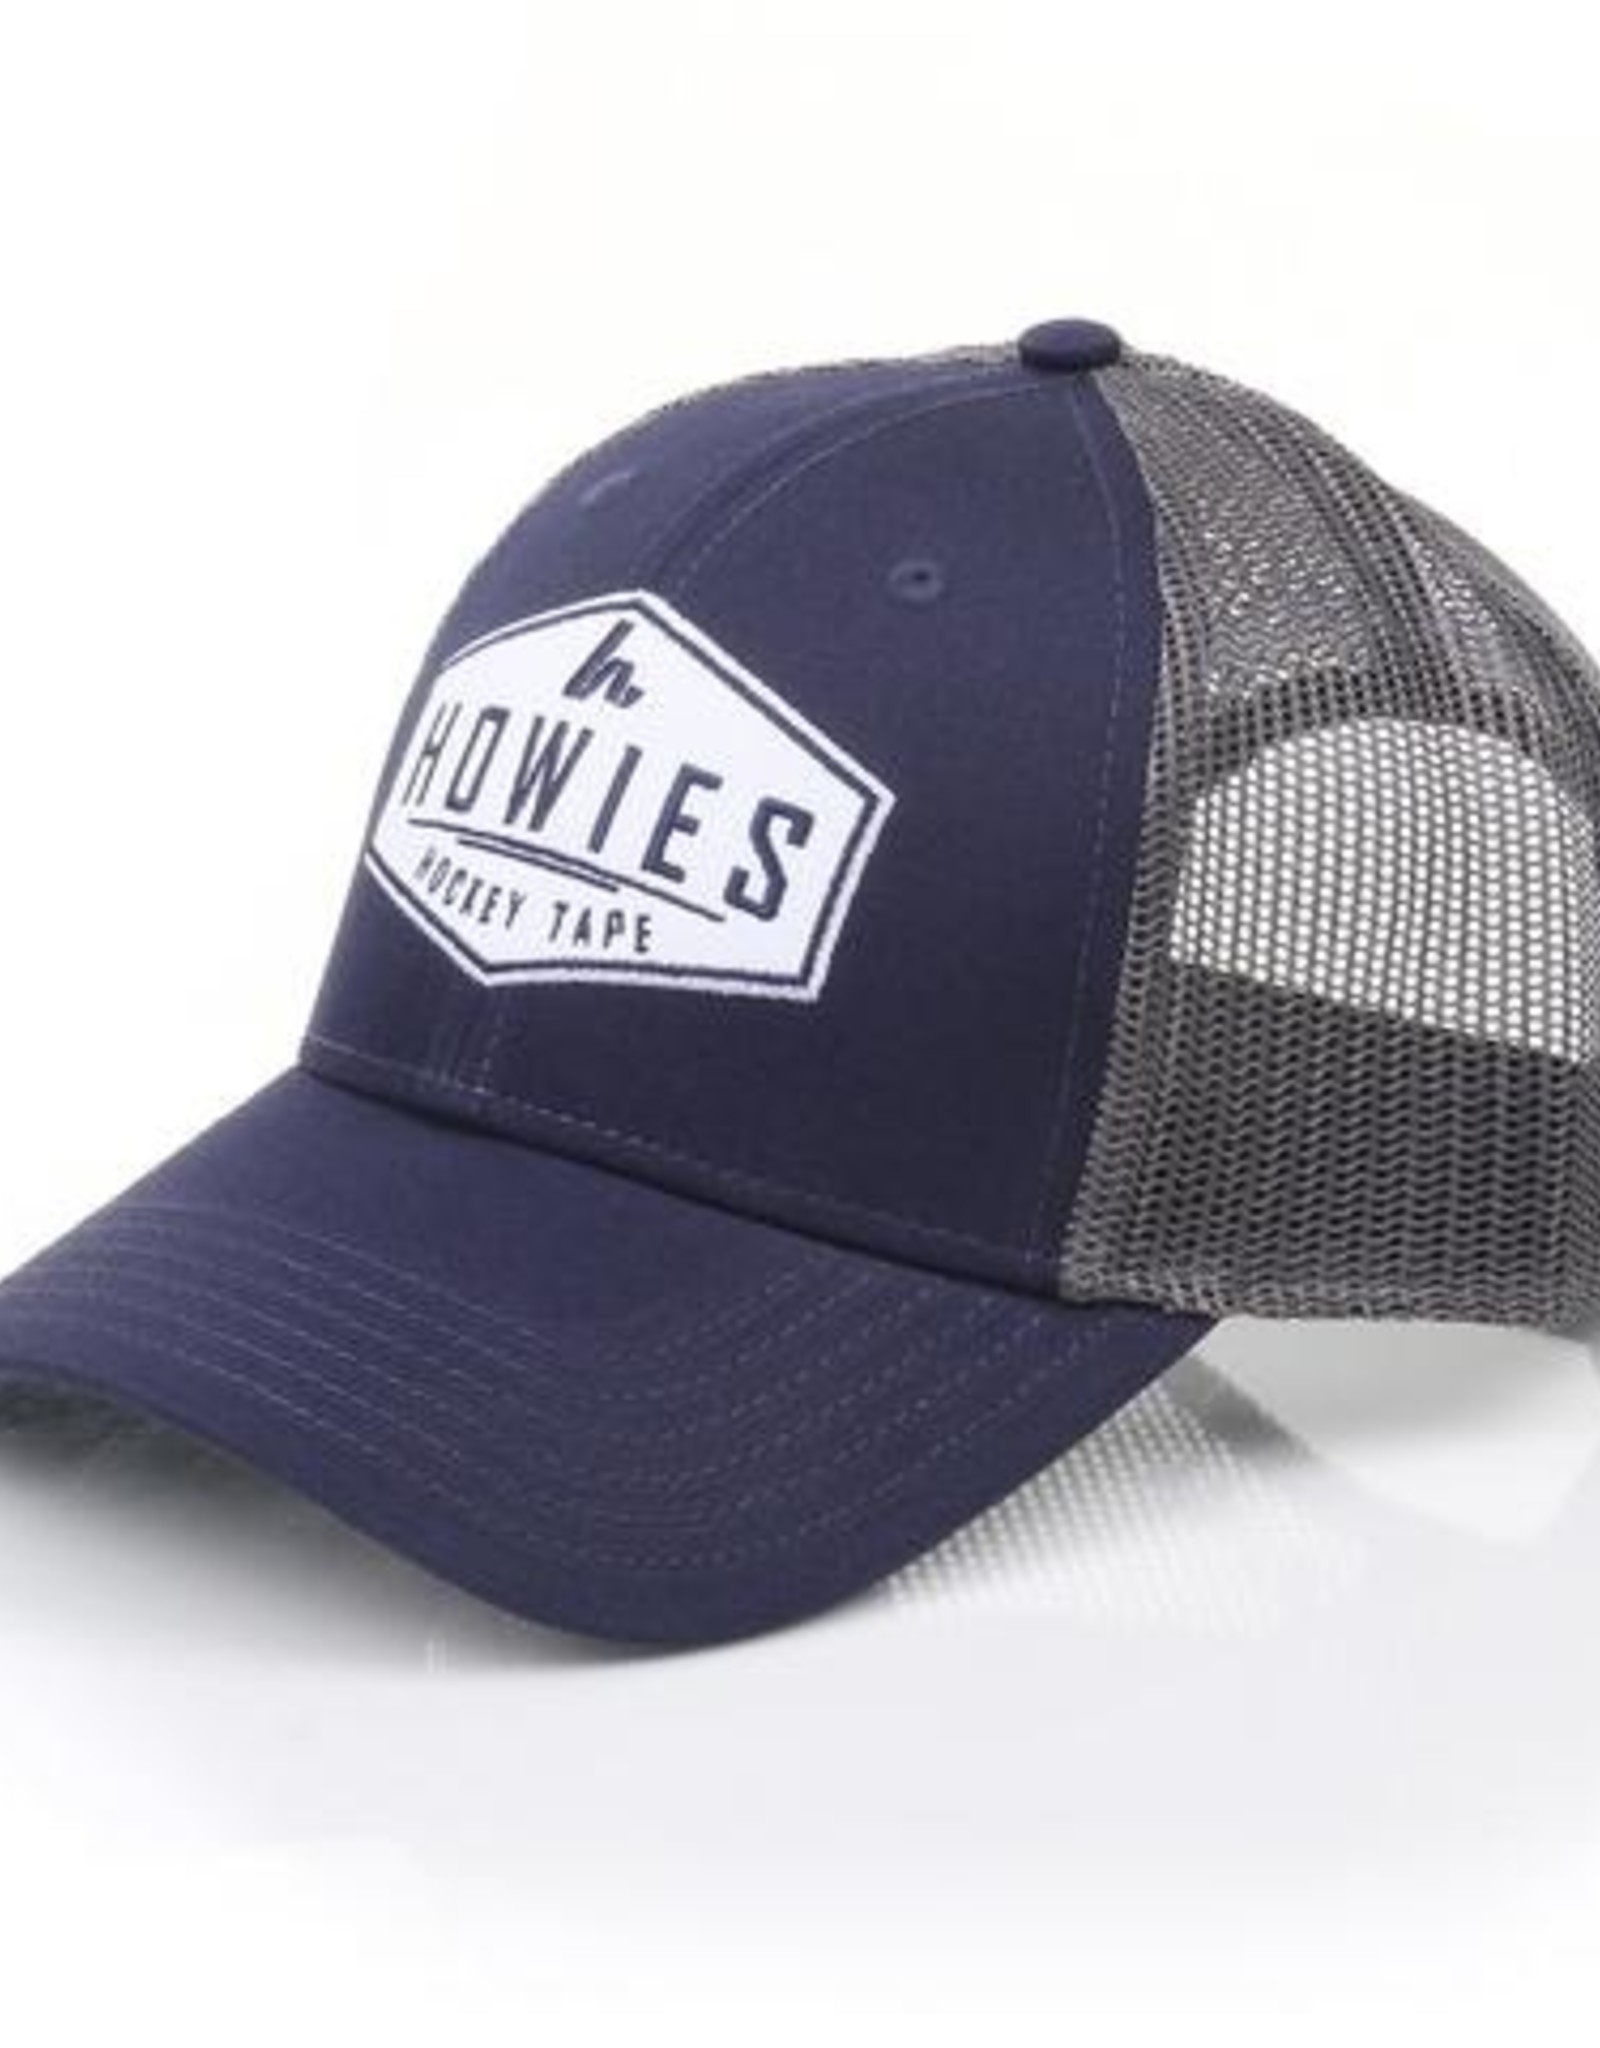 HOWIES HOWIES CASQUETTE